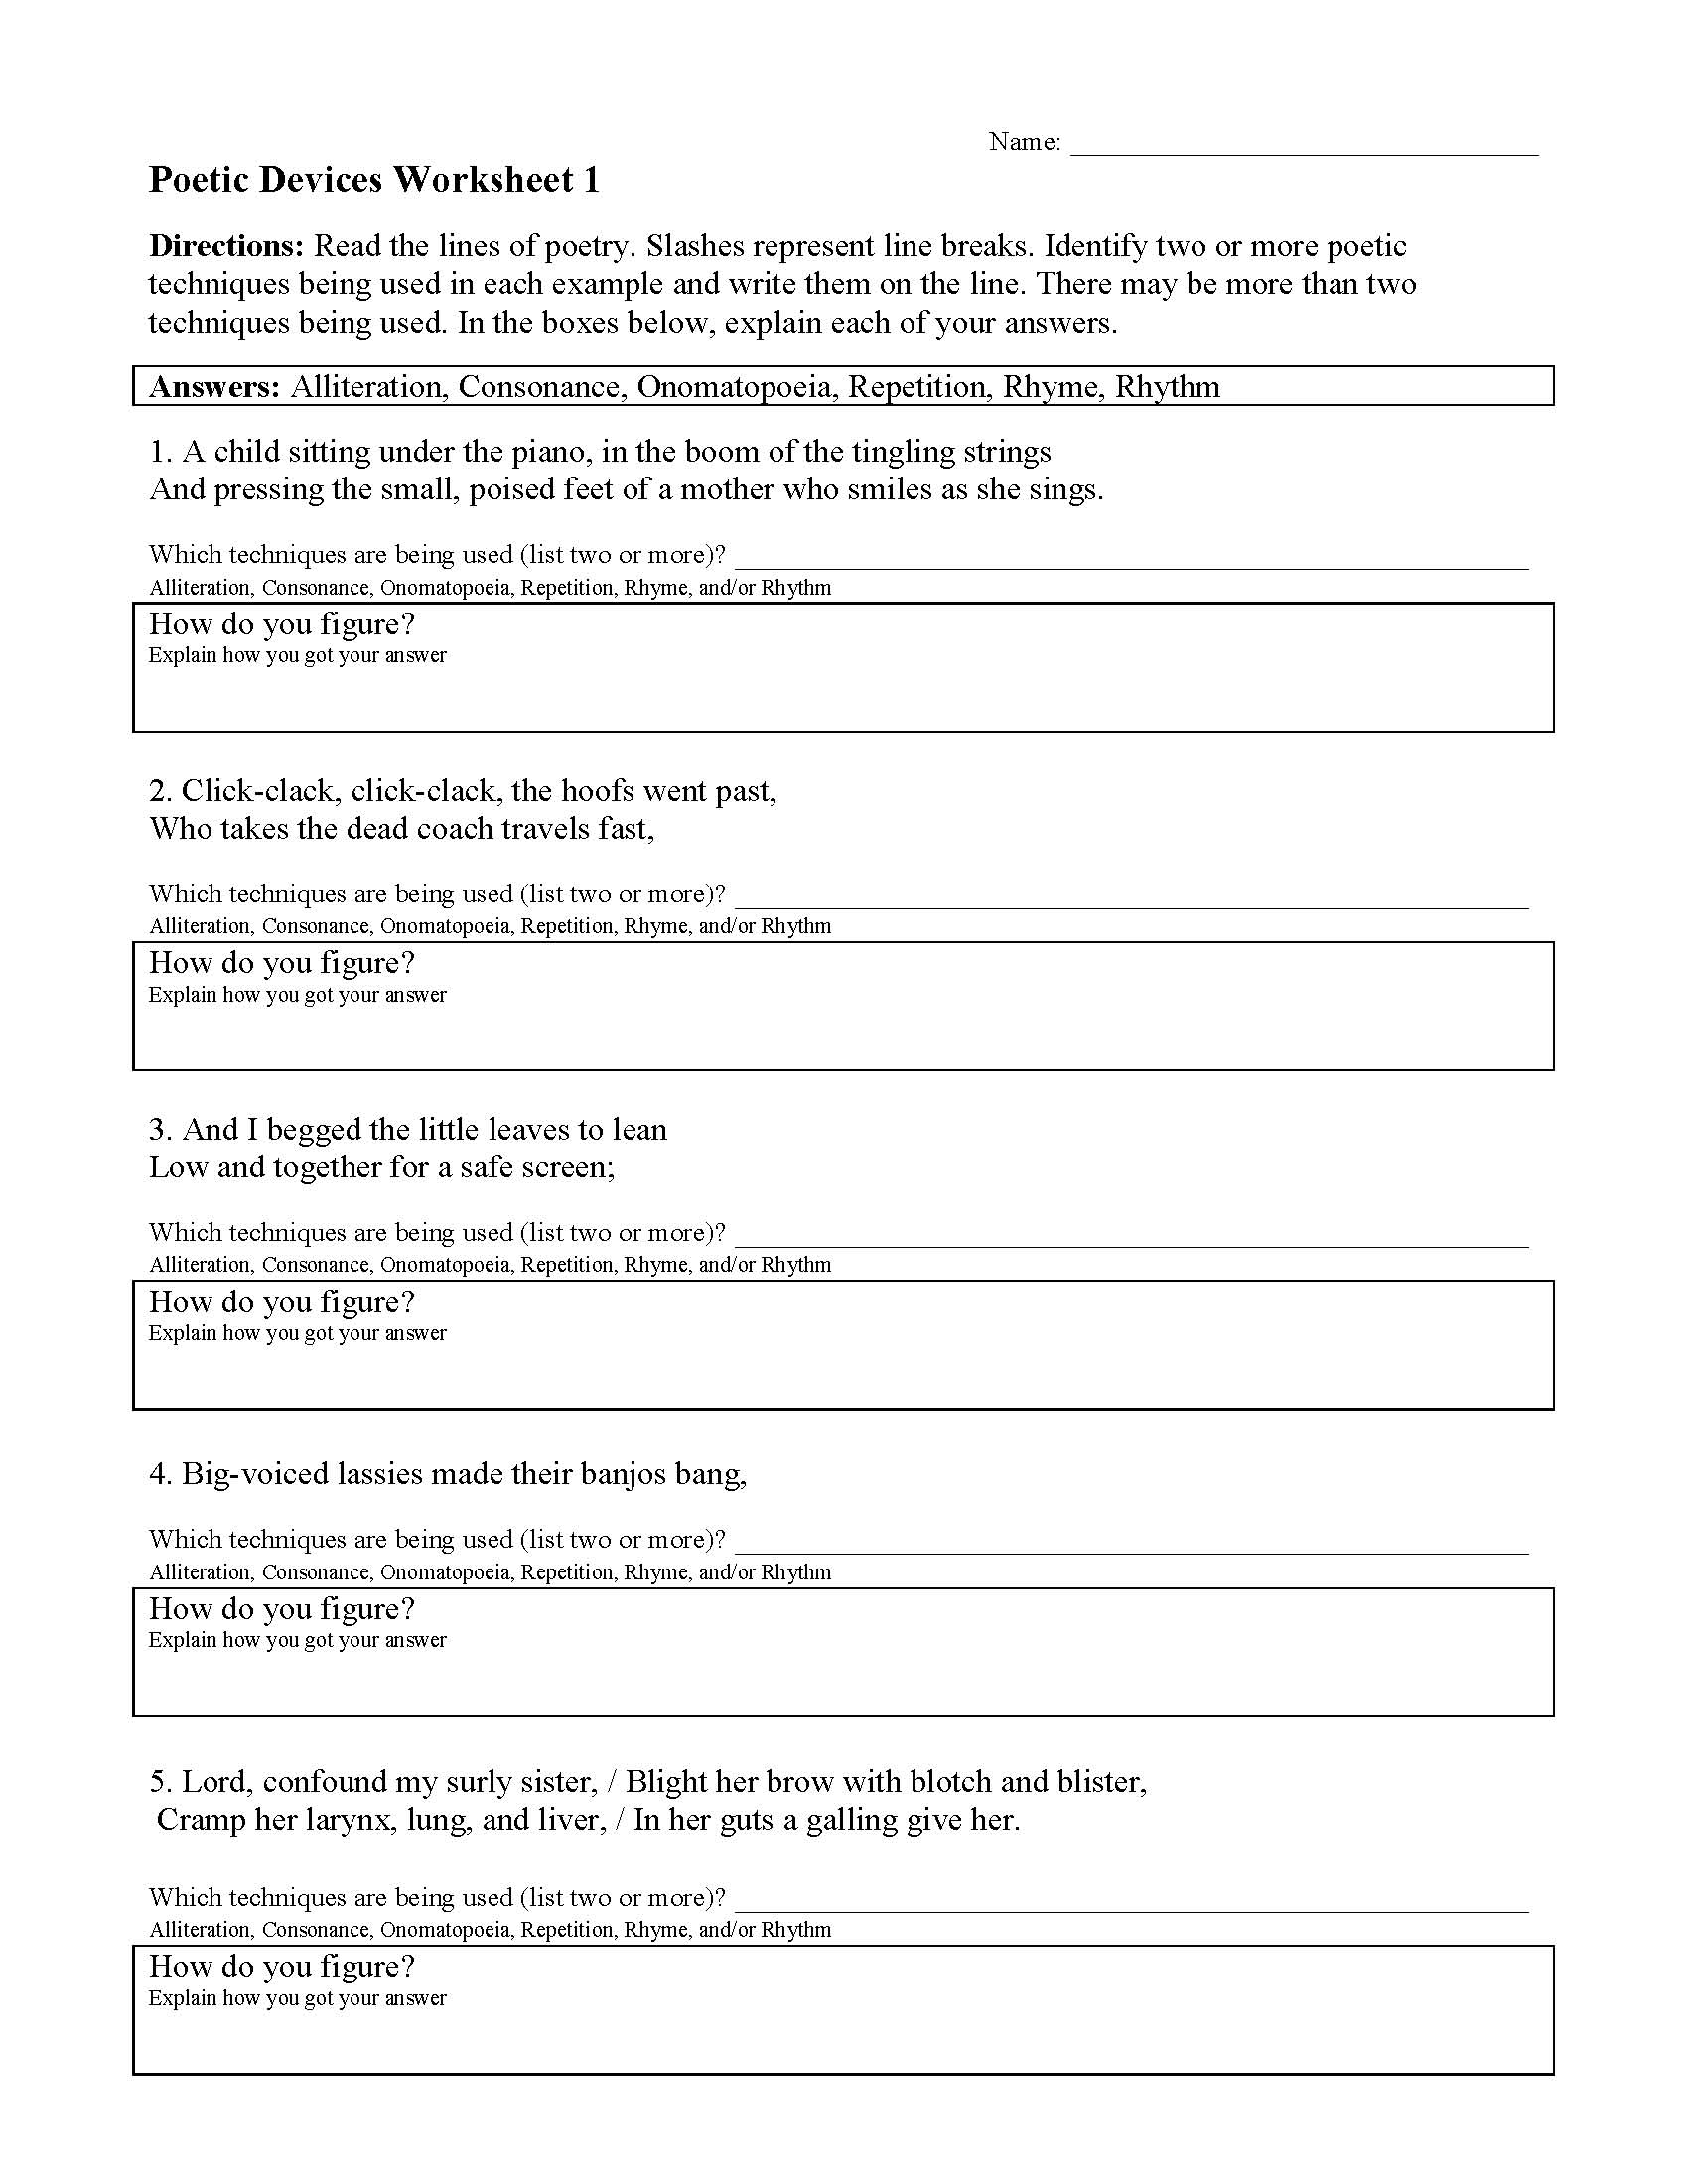 This is a preview image of Poetic Devices Worksheet 1. Click on it to enlarge it or view the source file.